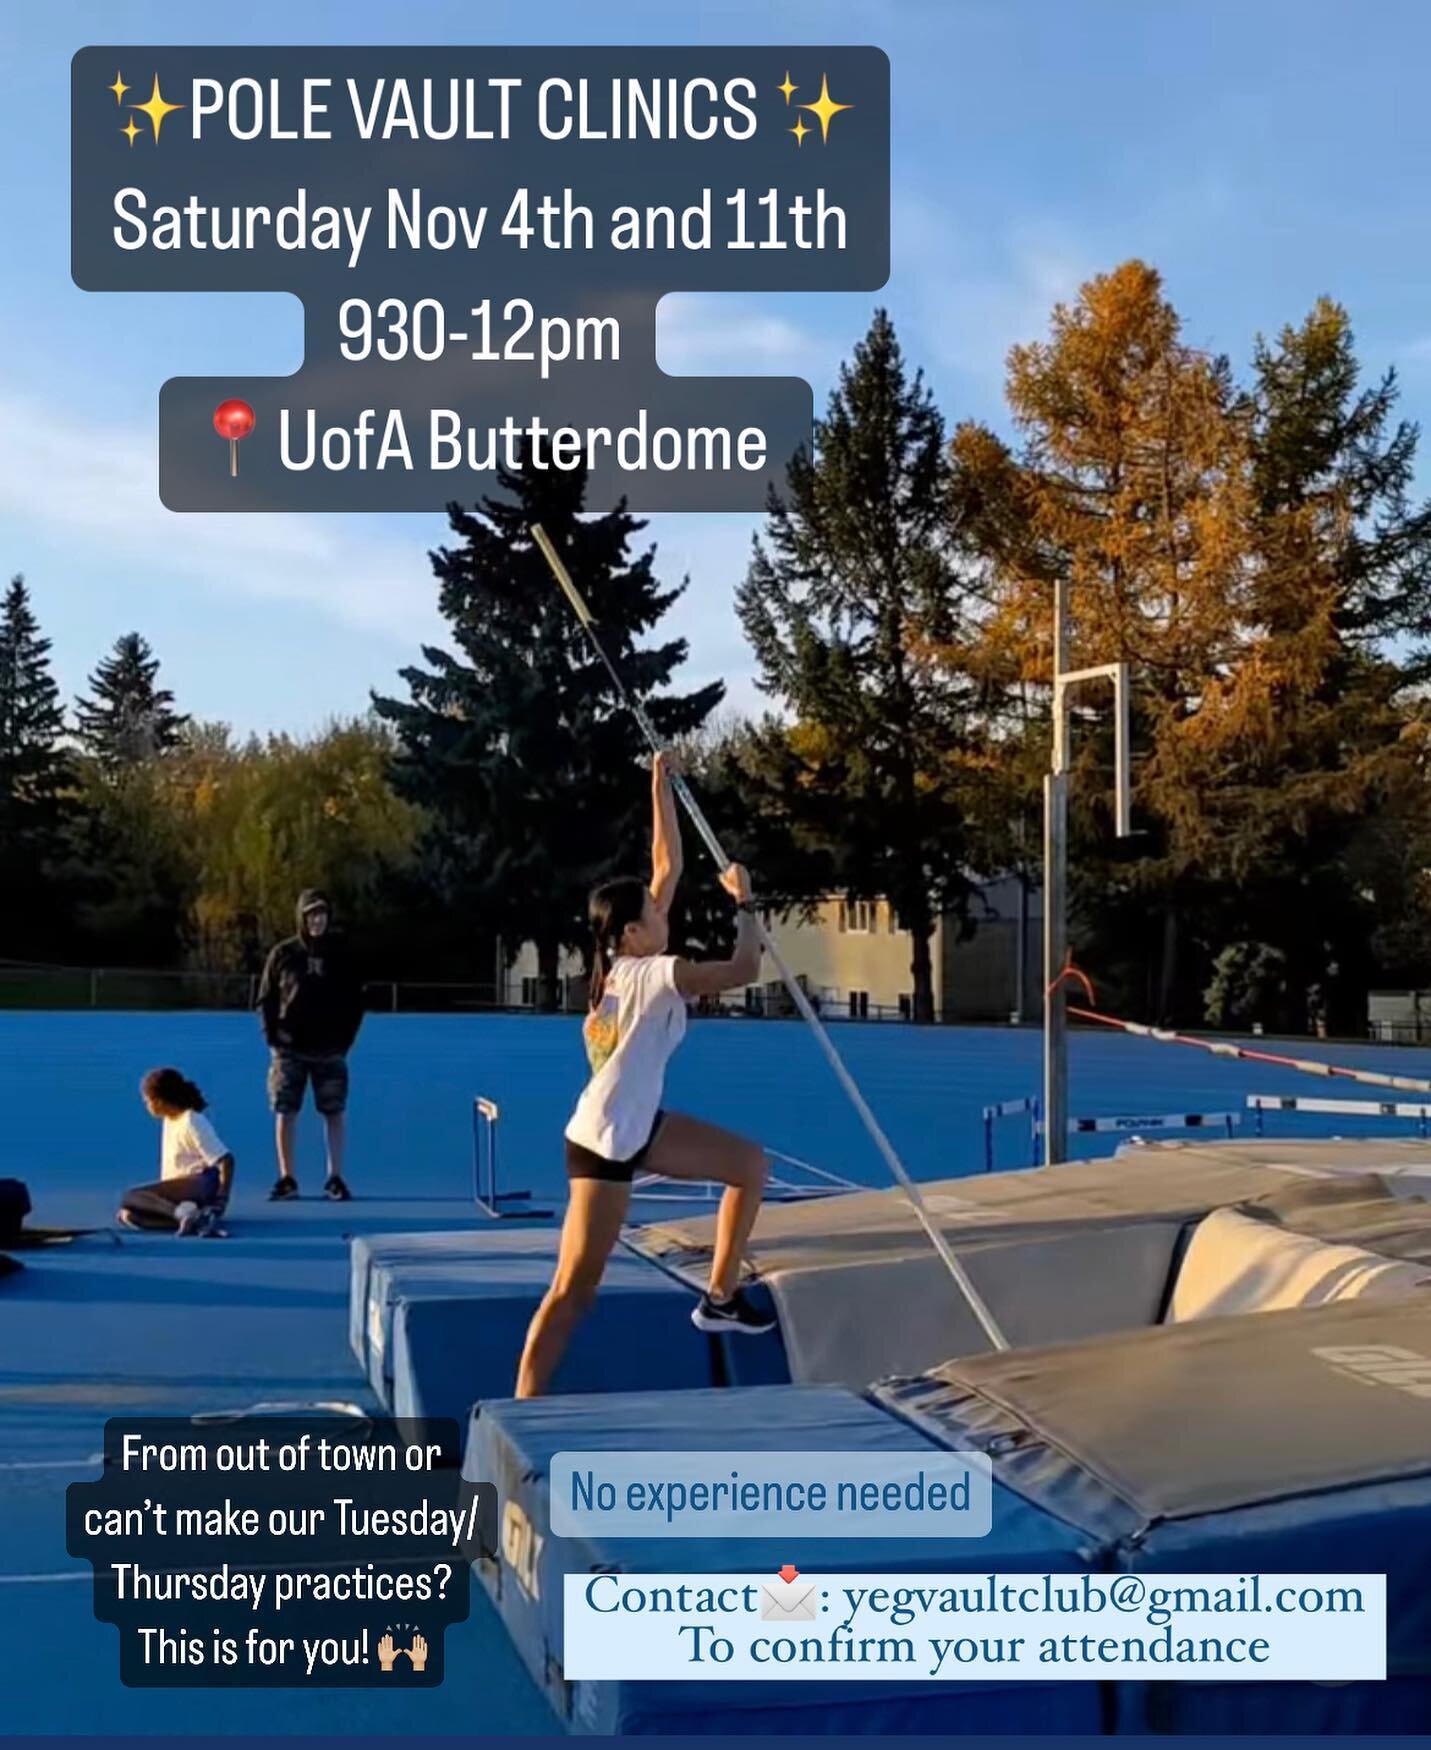 UPCOMING POLE VAULT CLINICS
Saturday November 4th &amp; 11th 
930-12pm @ UofA Butterdome. 
This clinic is specifically for athletes who can&rsquo;t make our Tuesday Thursday practices or live out of town. No experience necessary. 
Please contact yegv